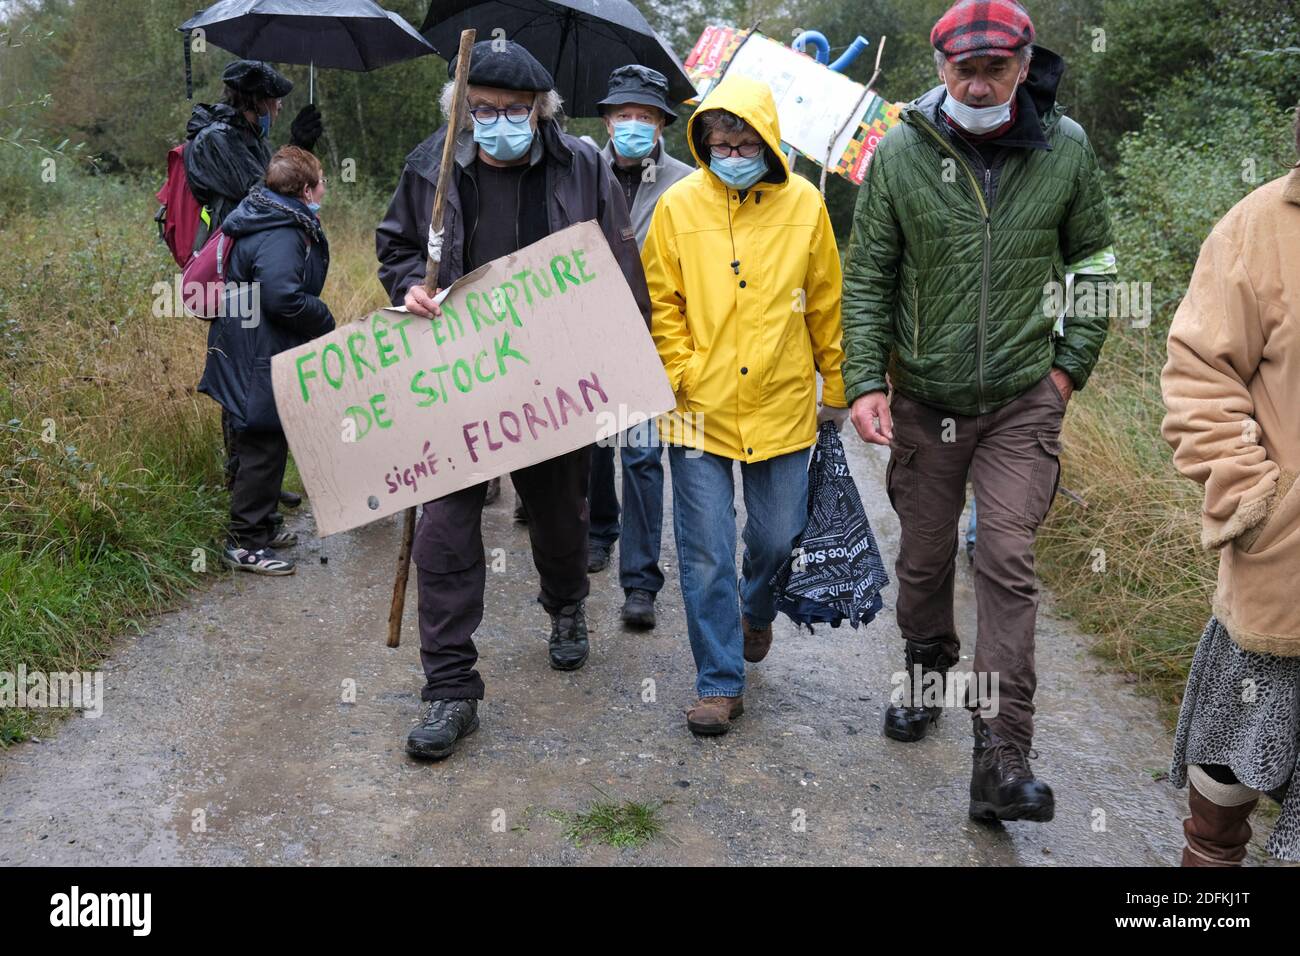 Protesters brave the rain on October 11, 2020, in Lannemezan, southern France, during a demonstration against a mega-sawmill project of Italian group Florian, to be set up in the municipality. Around 1000 people protested to protest against the mega-sawmill project presented last December, judging its production volume to be 'excessive'. The sawmill would require a supply of 50,000 m3 of lumber per year, from an operating area covering several departments in the Pyrenees. Photo by Patrick Batard/ABACAPRESS.COM Stock Photo